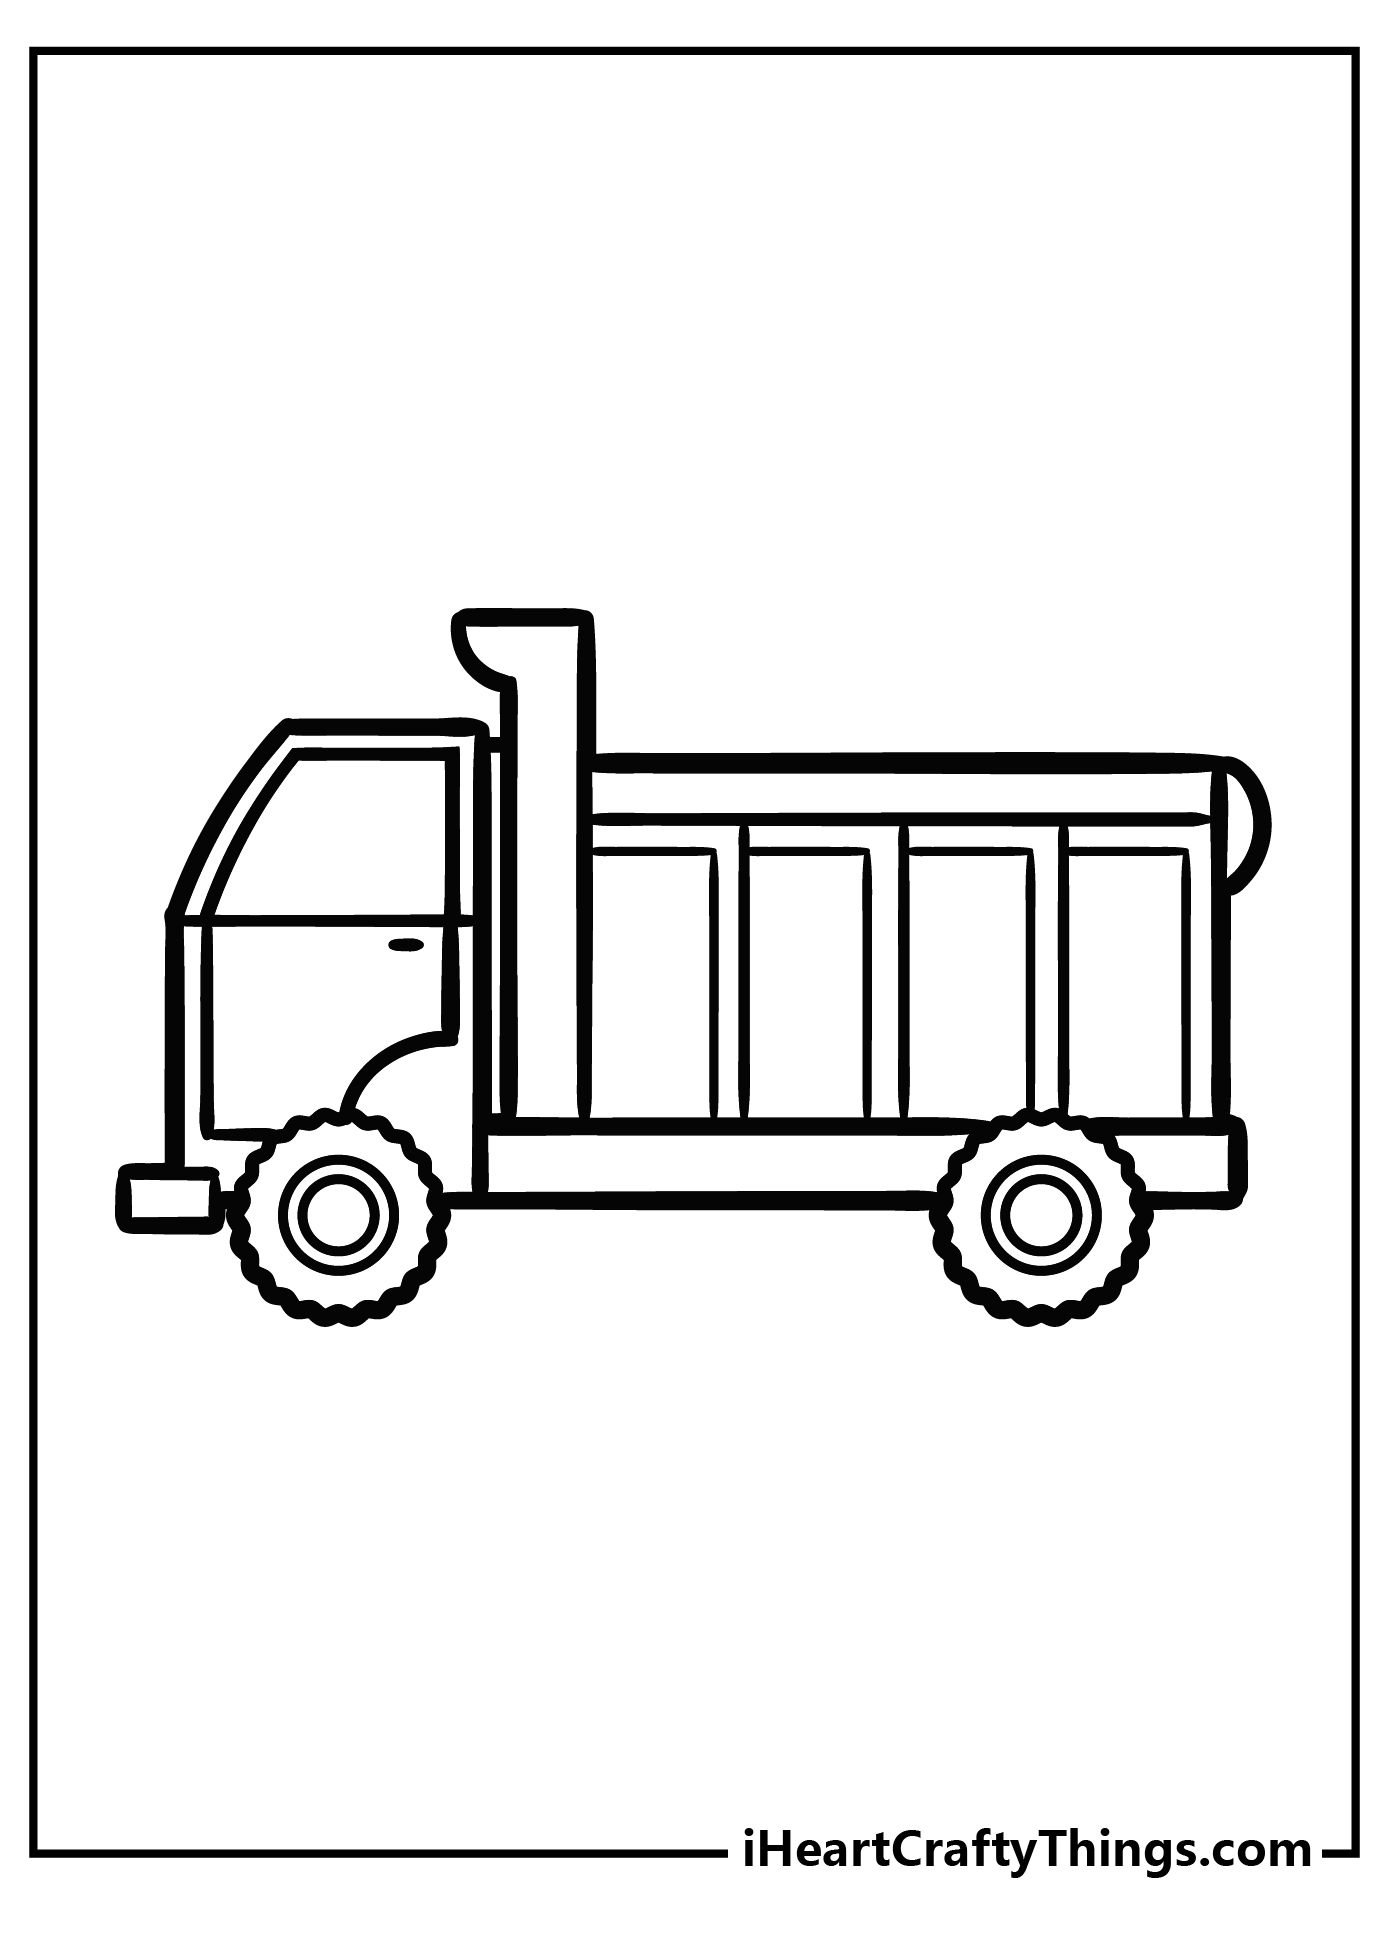 Dump Truck Coloring Pages for kids free download